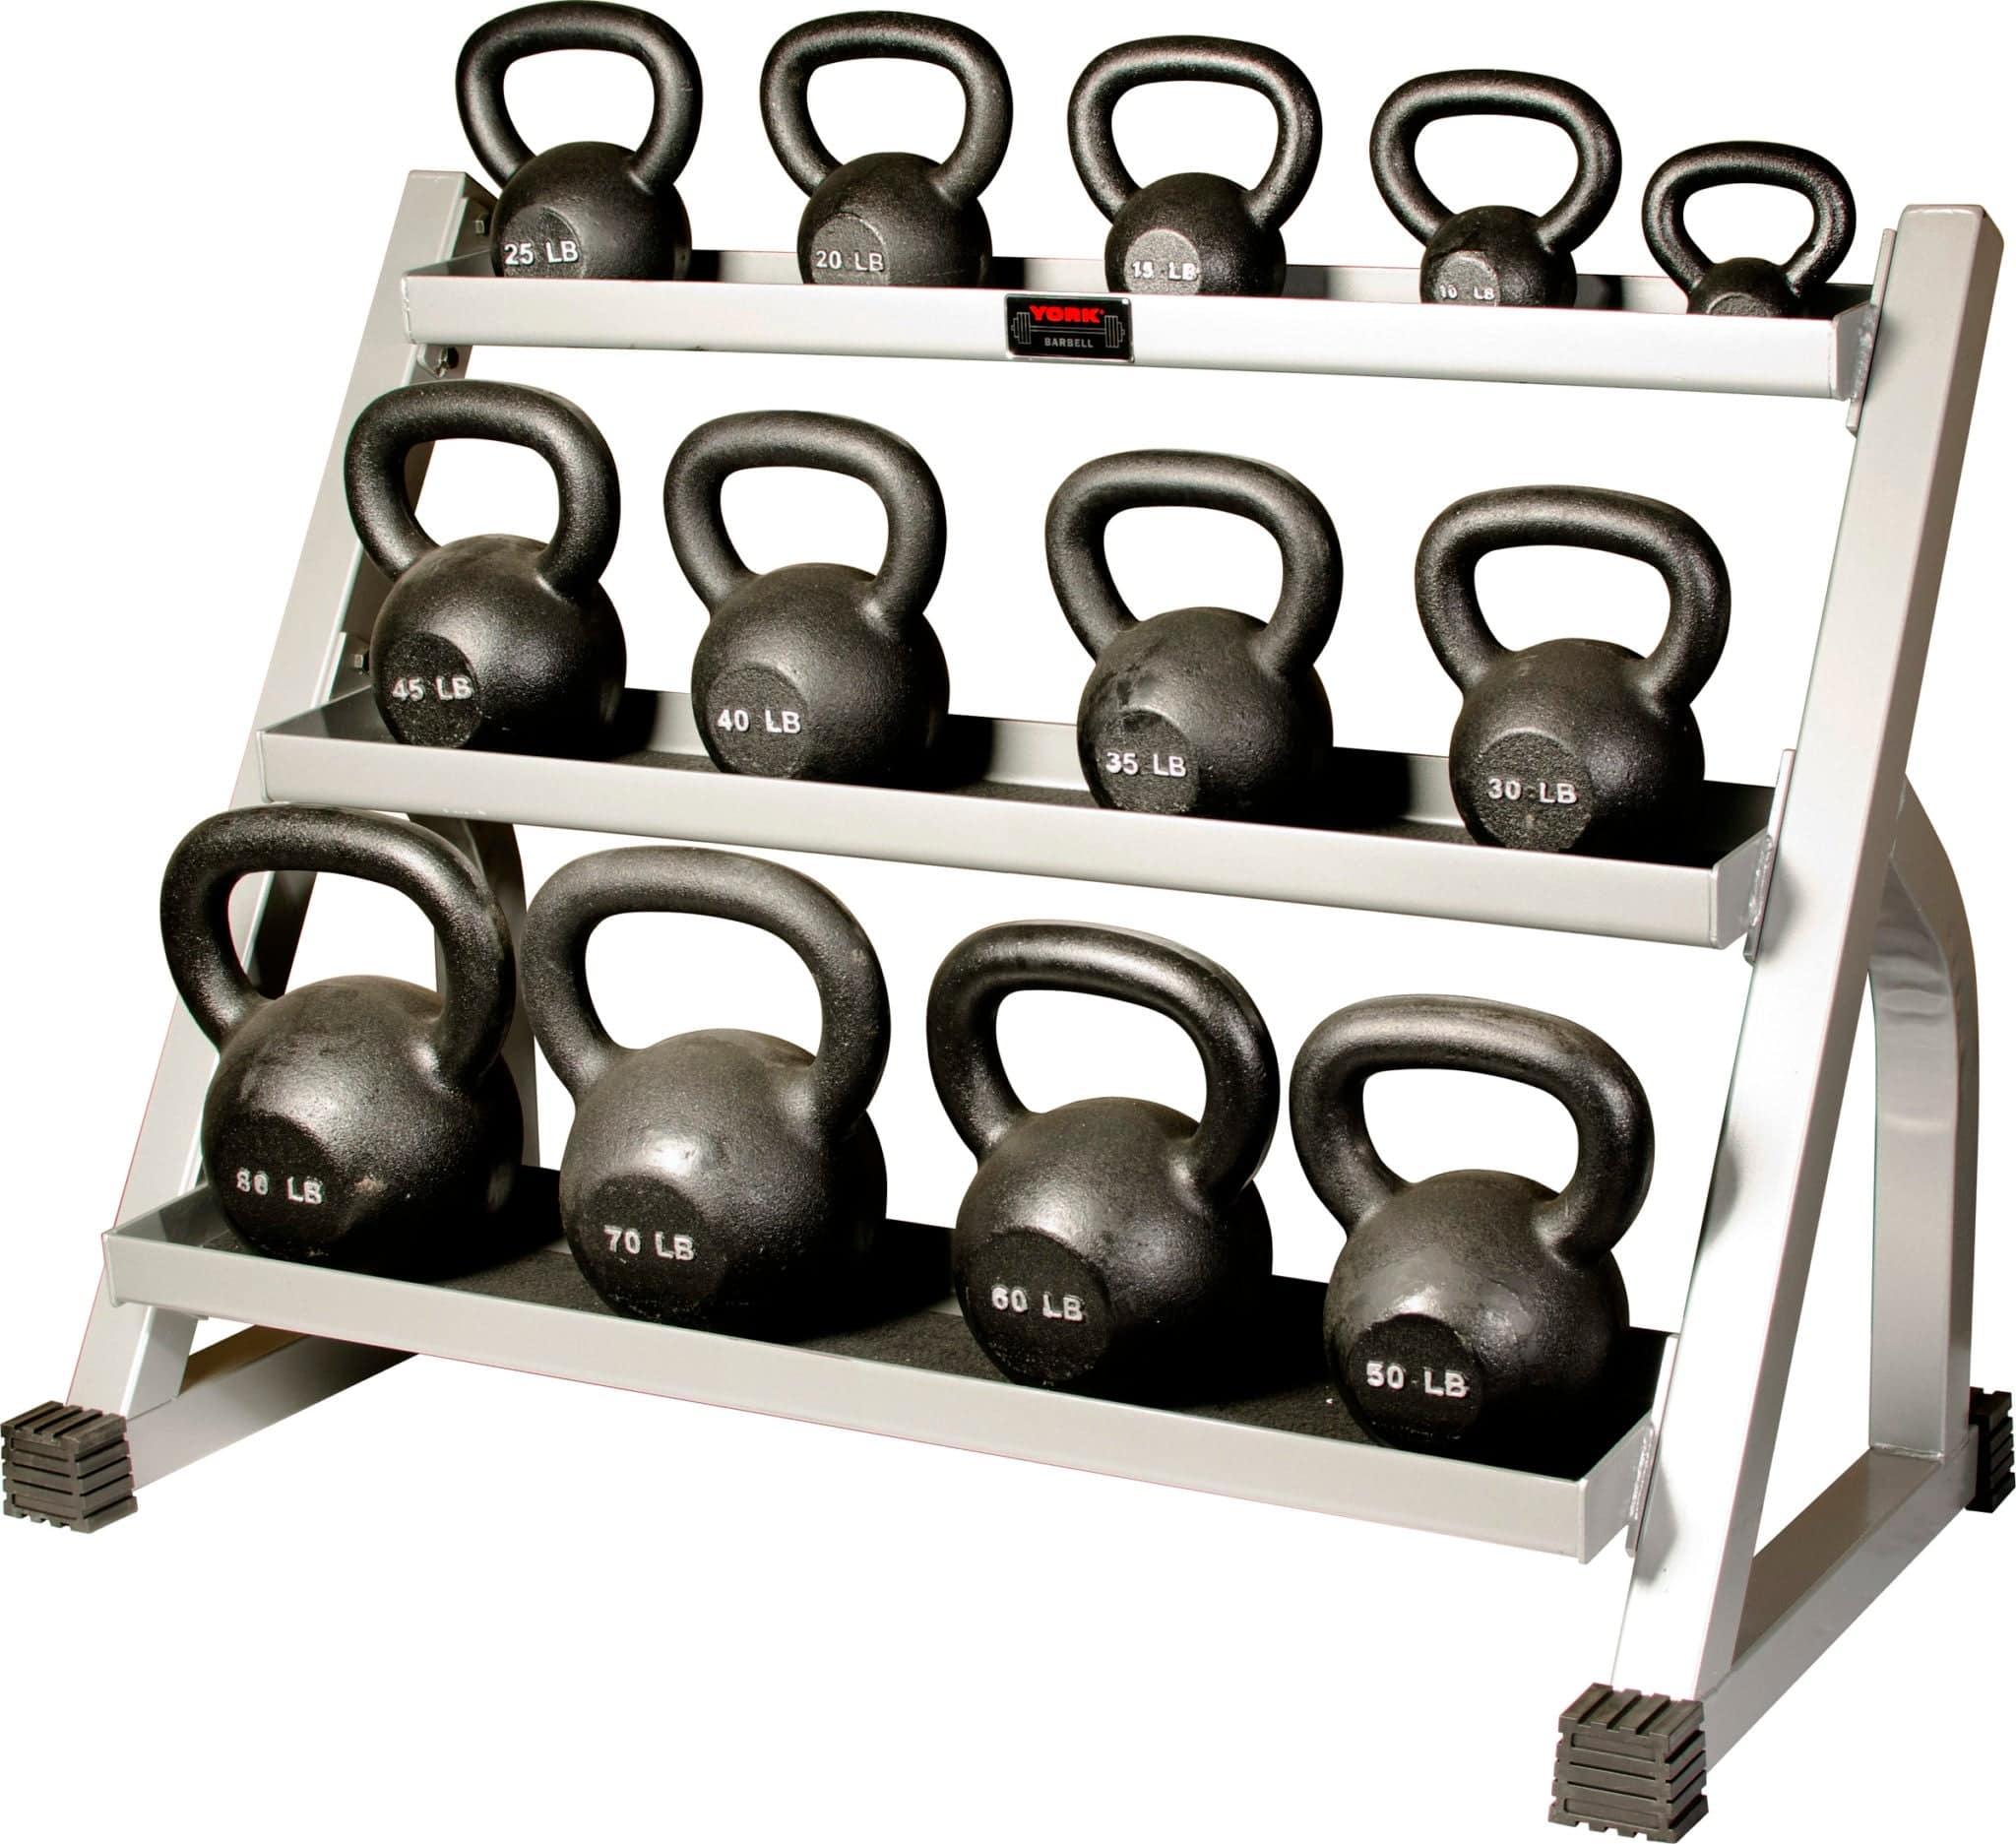 York Barbell | Kettlebell Stands - 3 Tier - XTC Fitness - Exercise Equipment Superstore - Canada - Kettlebell Storage